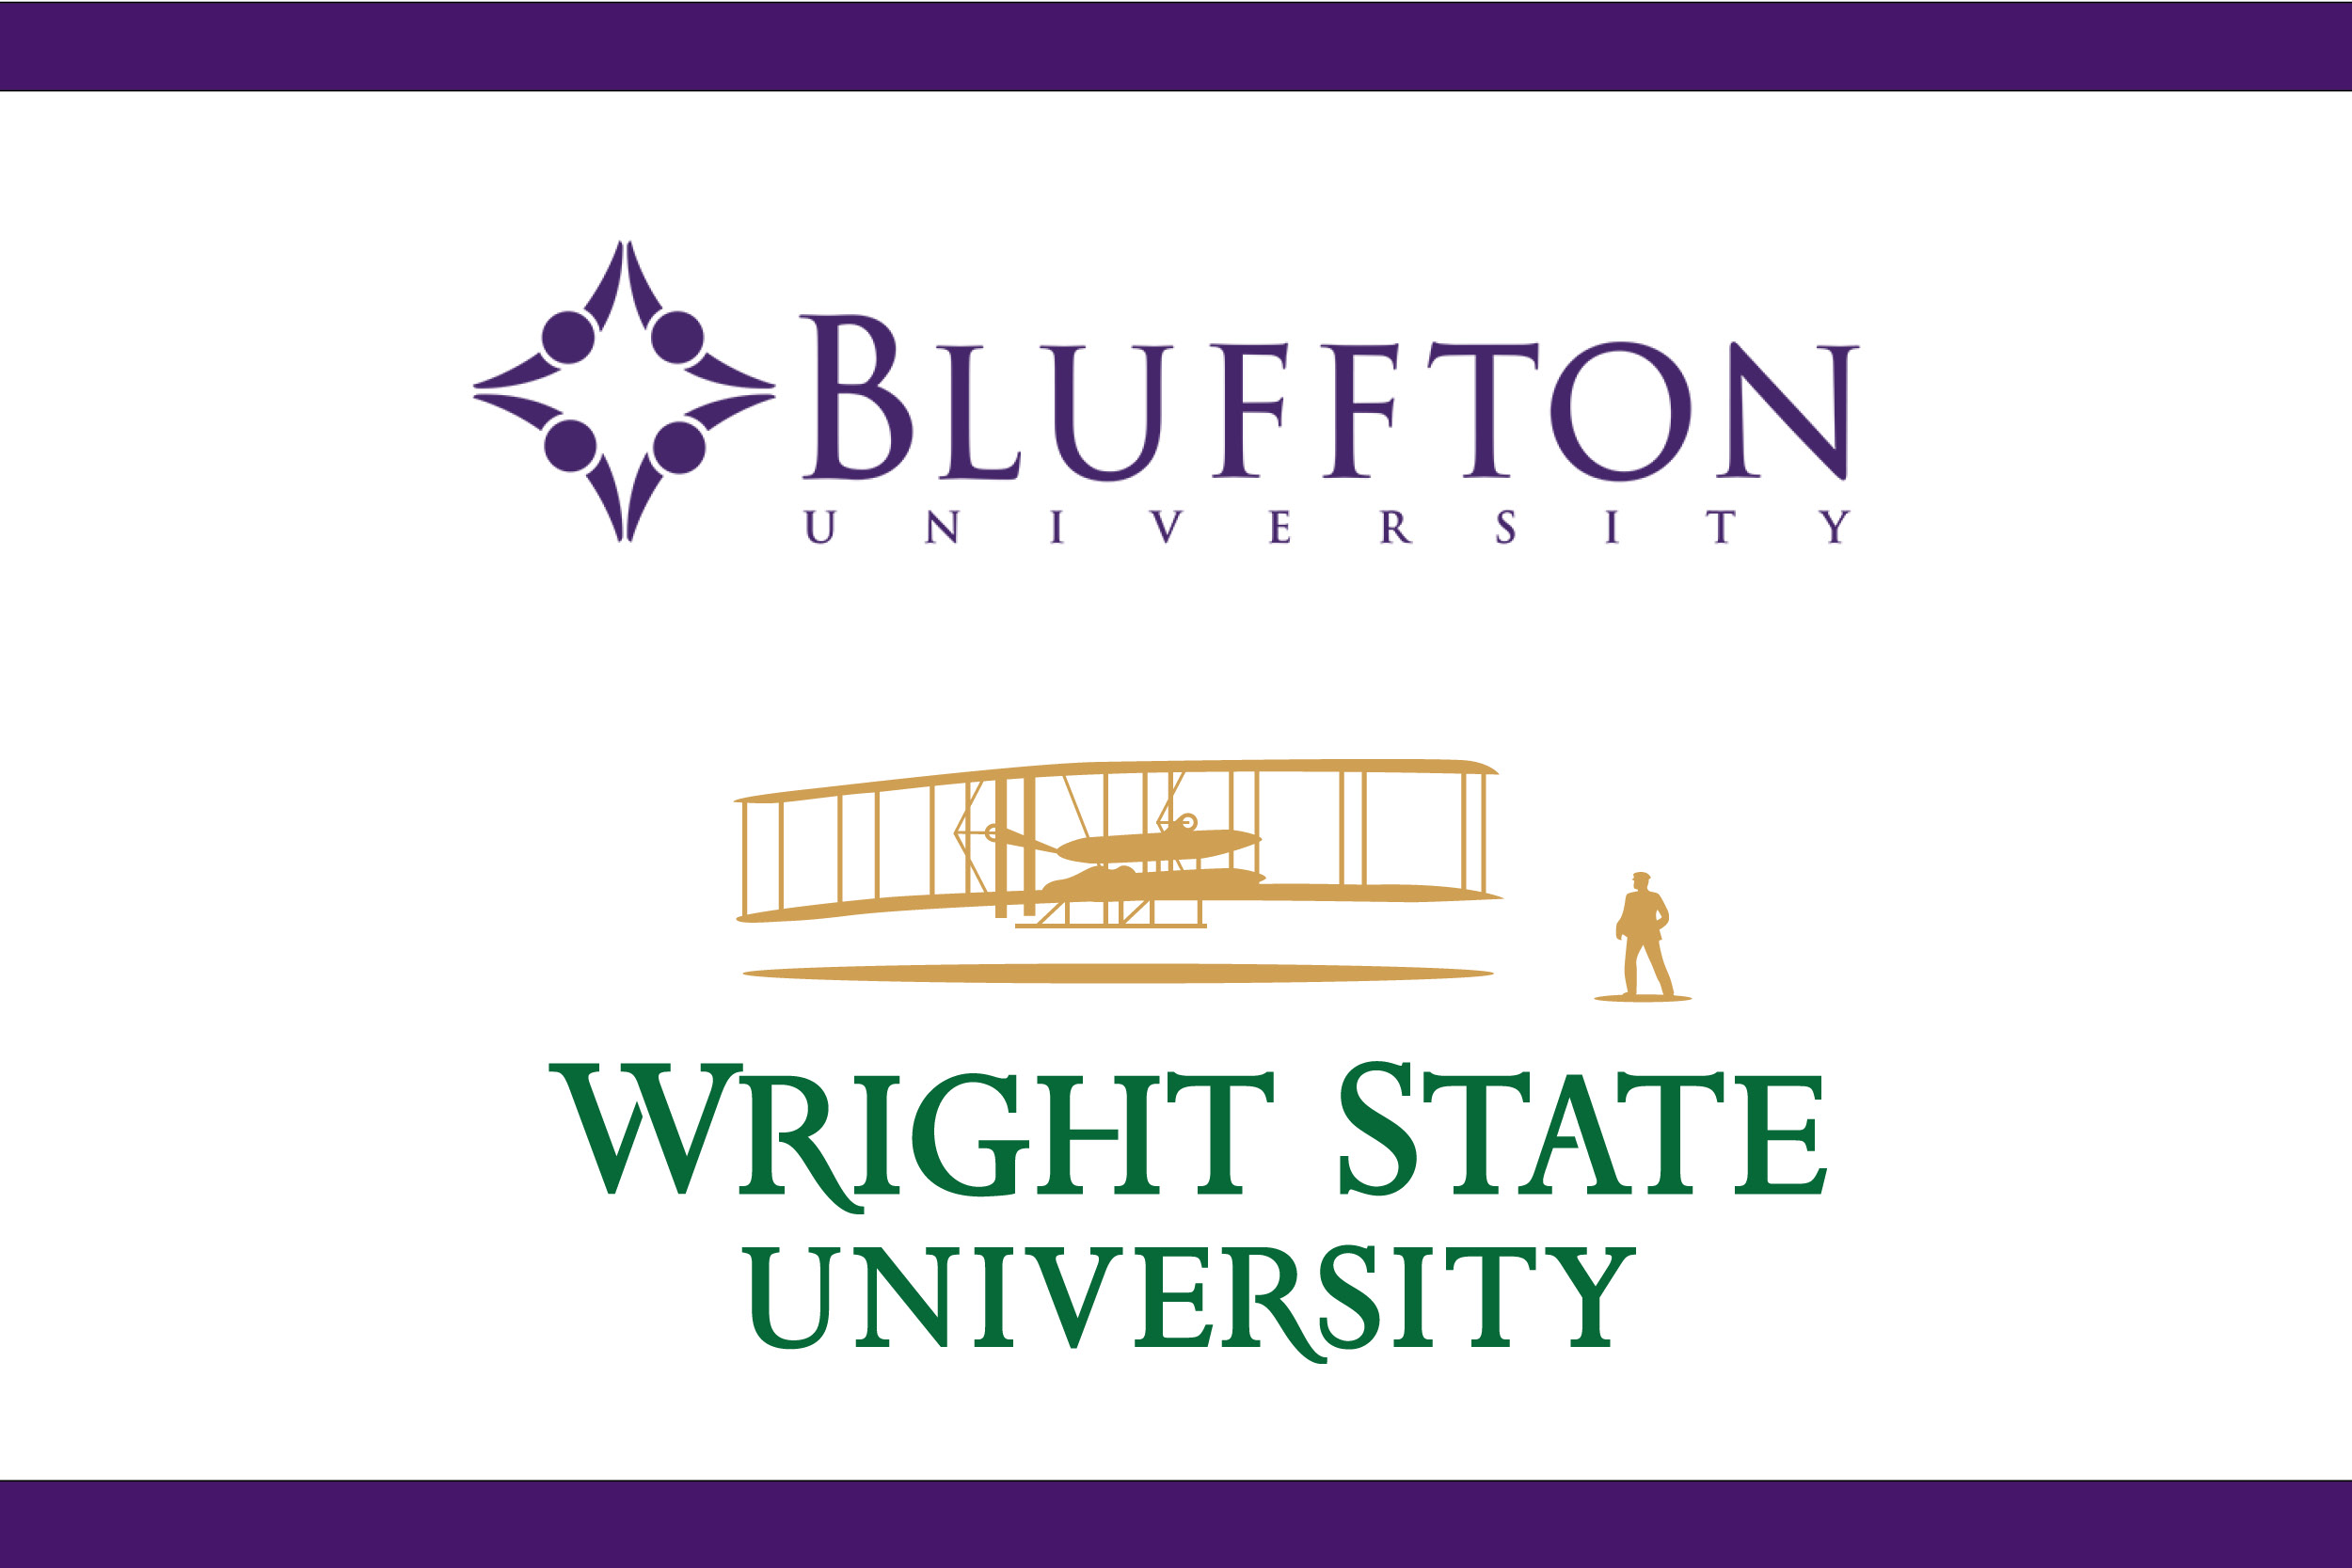 Engineering partnership formed between Bluffton and Wright State University.